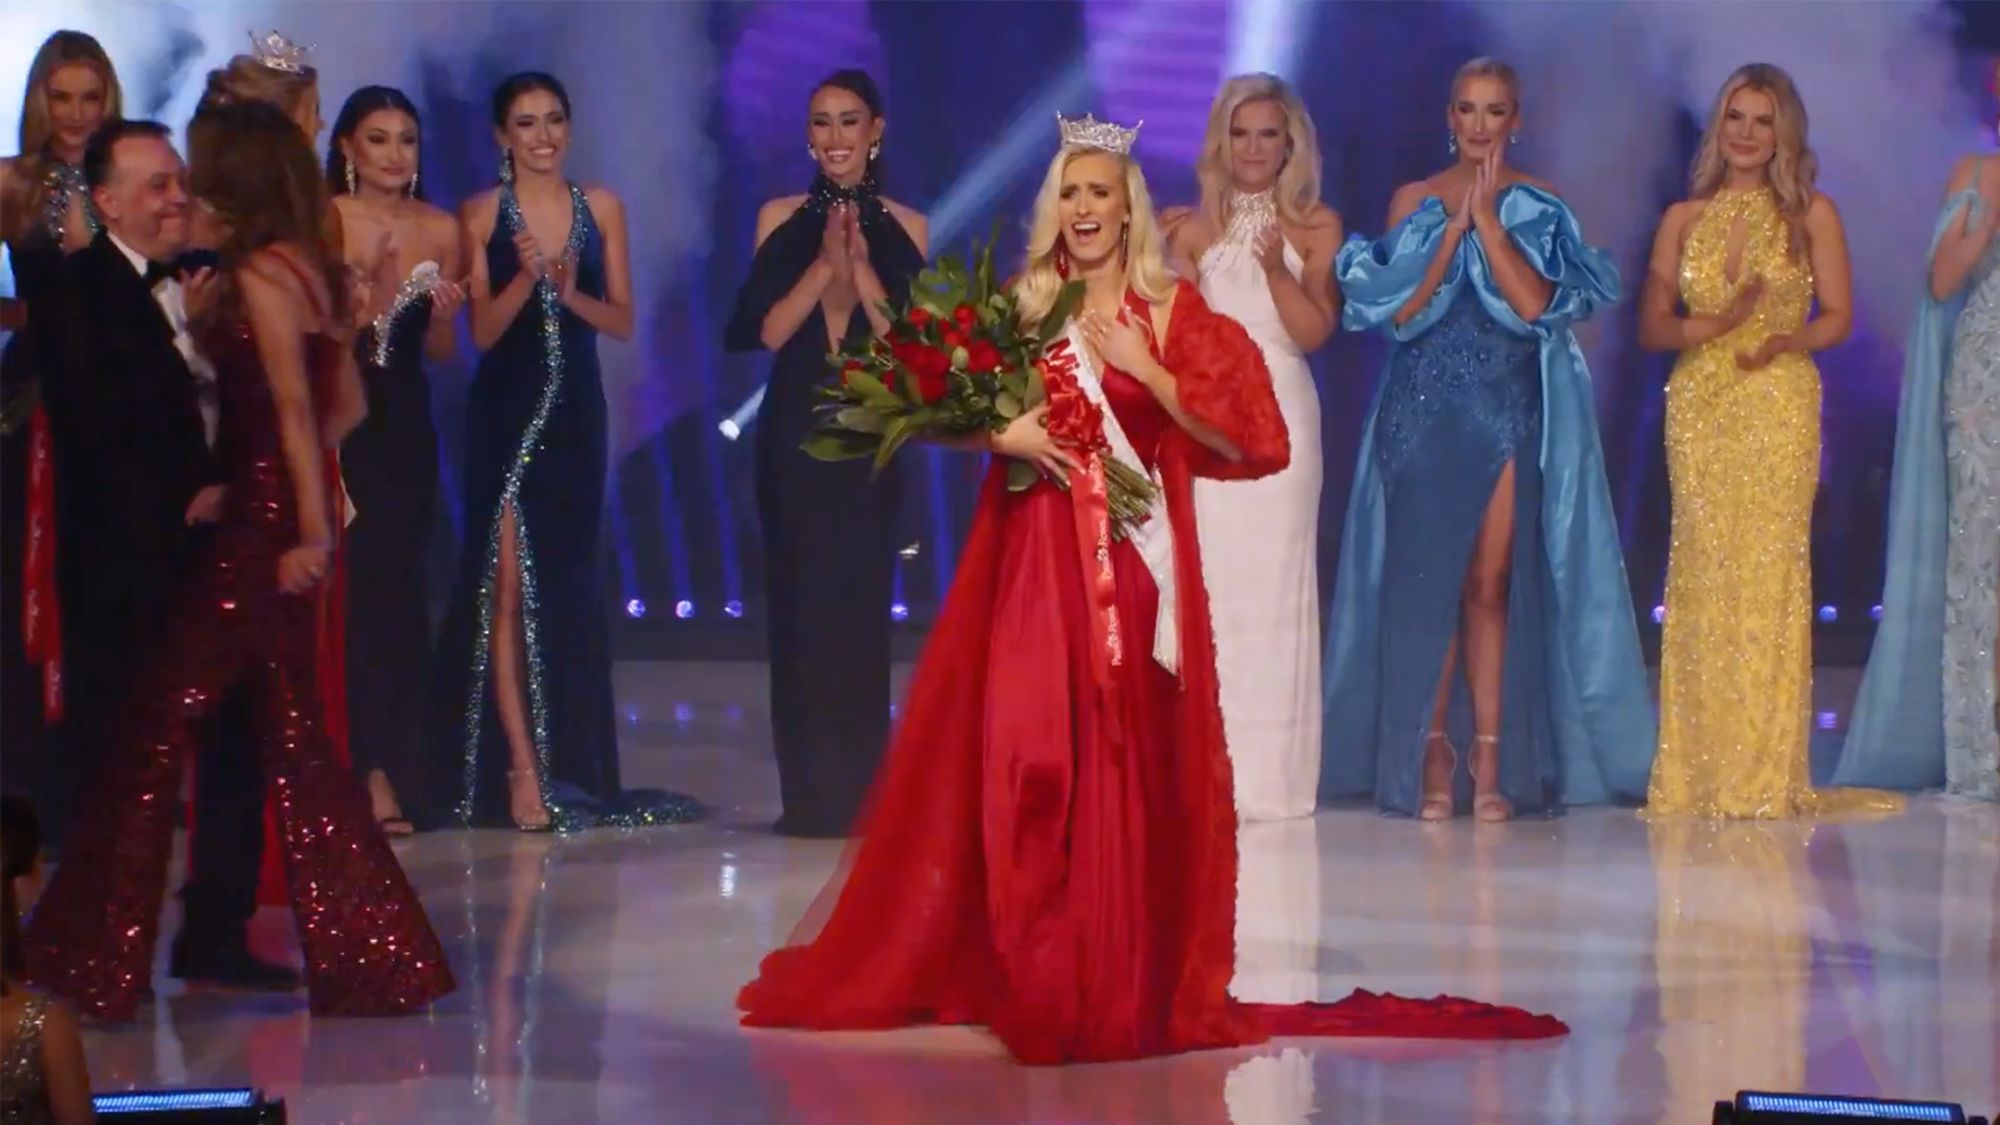 Colorado's Madison Marsh is named Miss America at Sunday evening's finale.